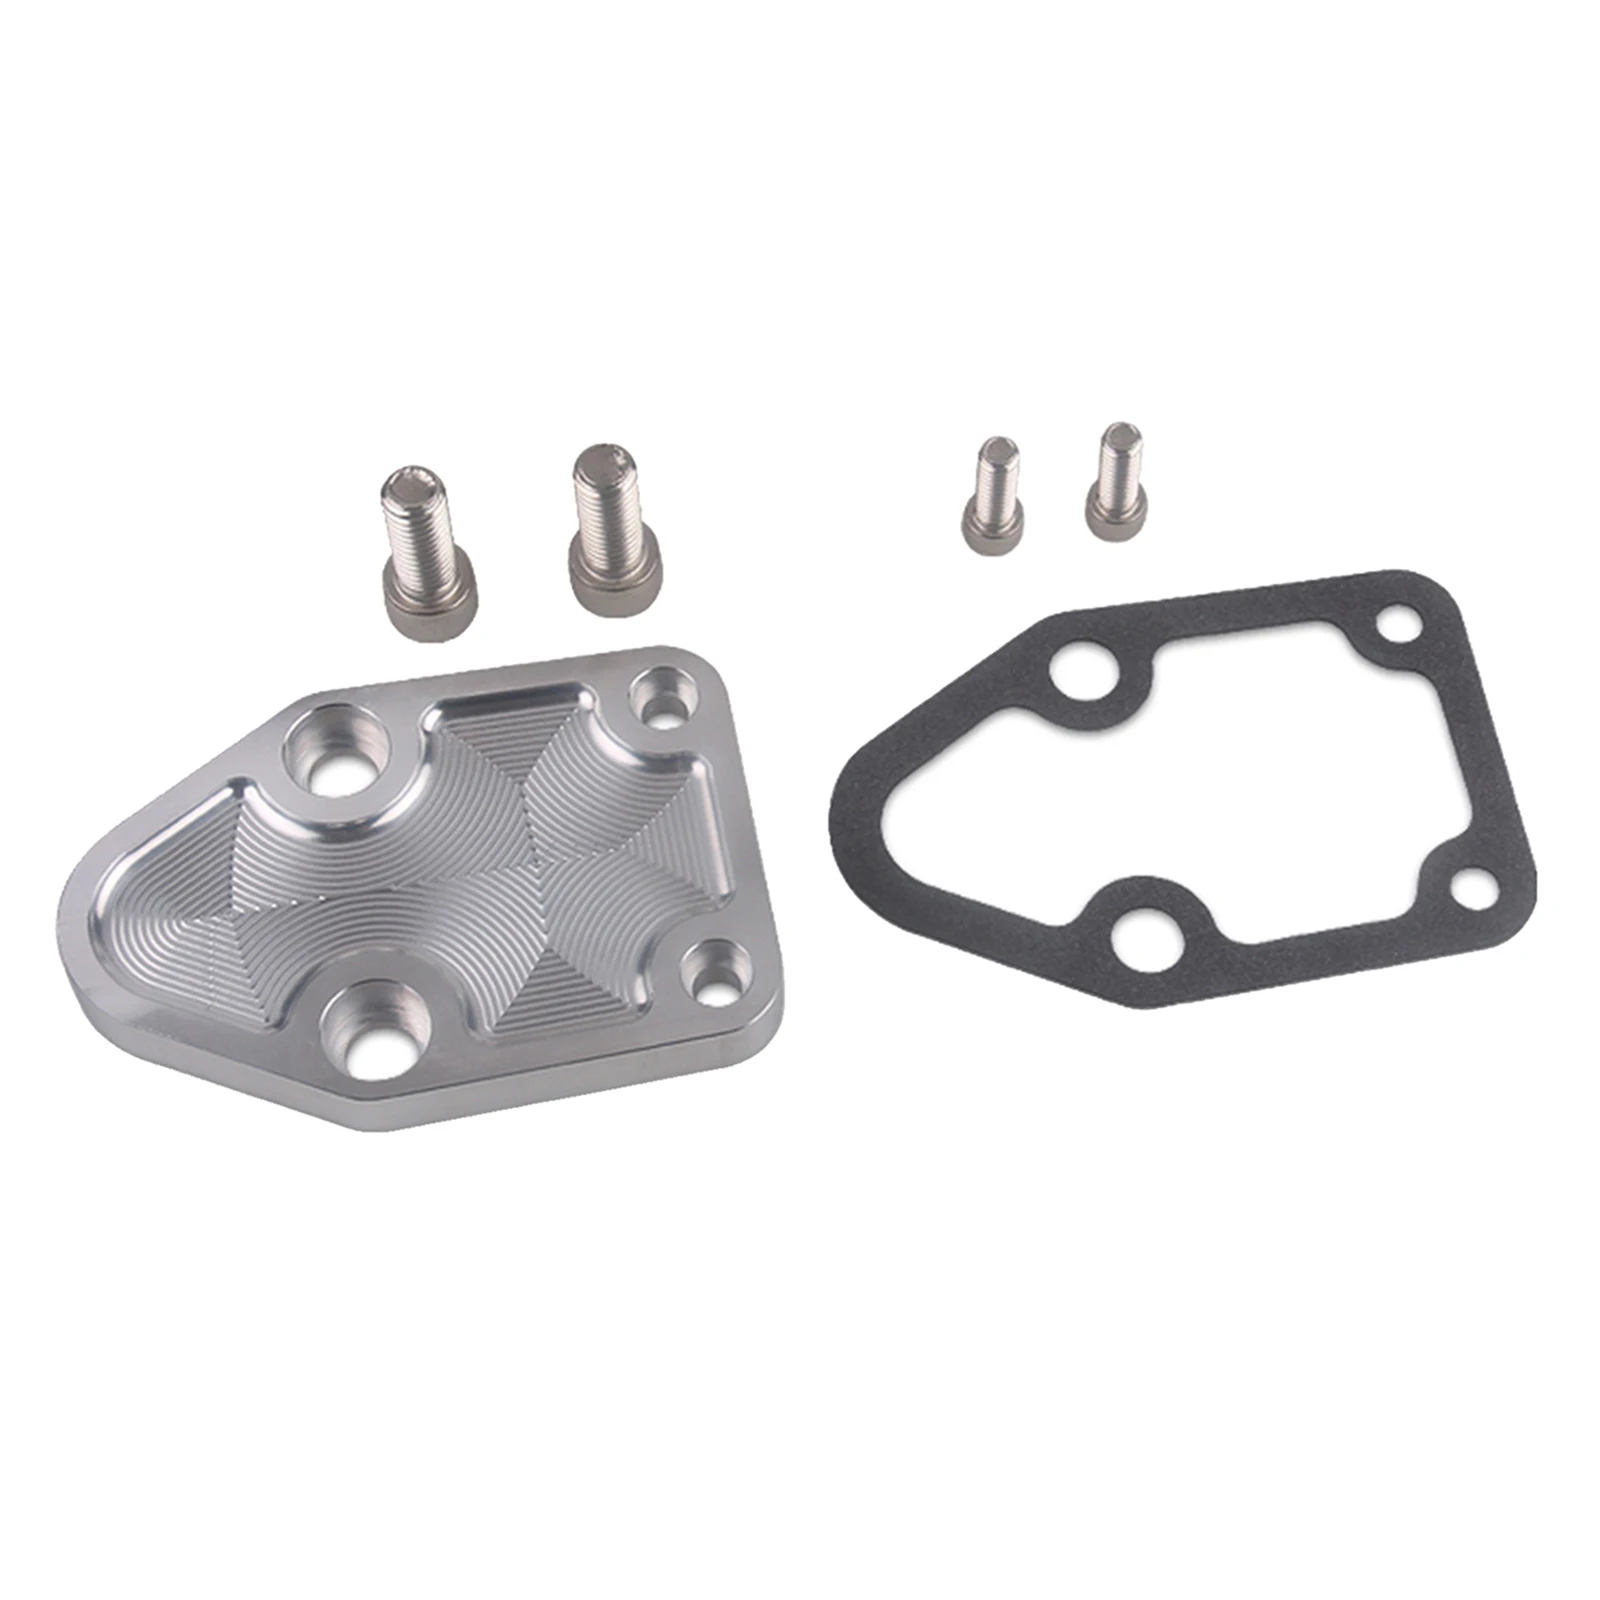 Fuel Pump Mounting Plate Replacement Suitable for 283 327 350 400 ,Durable Material